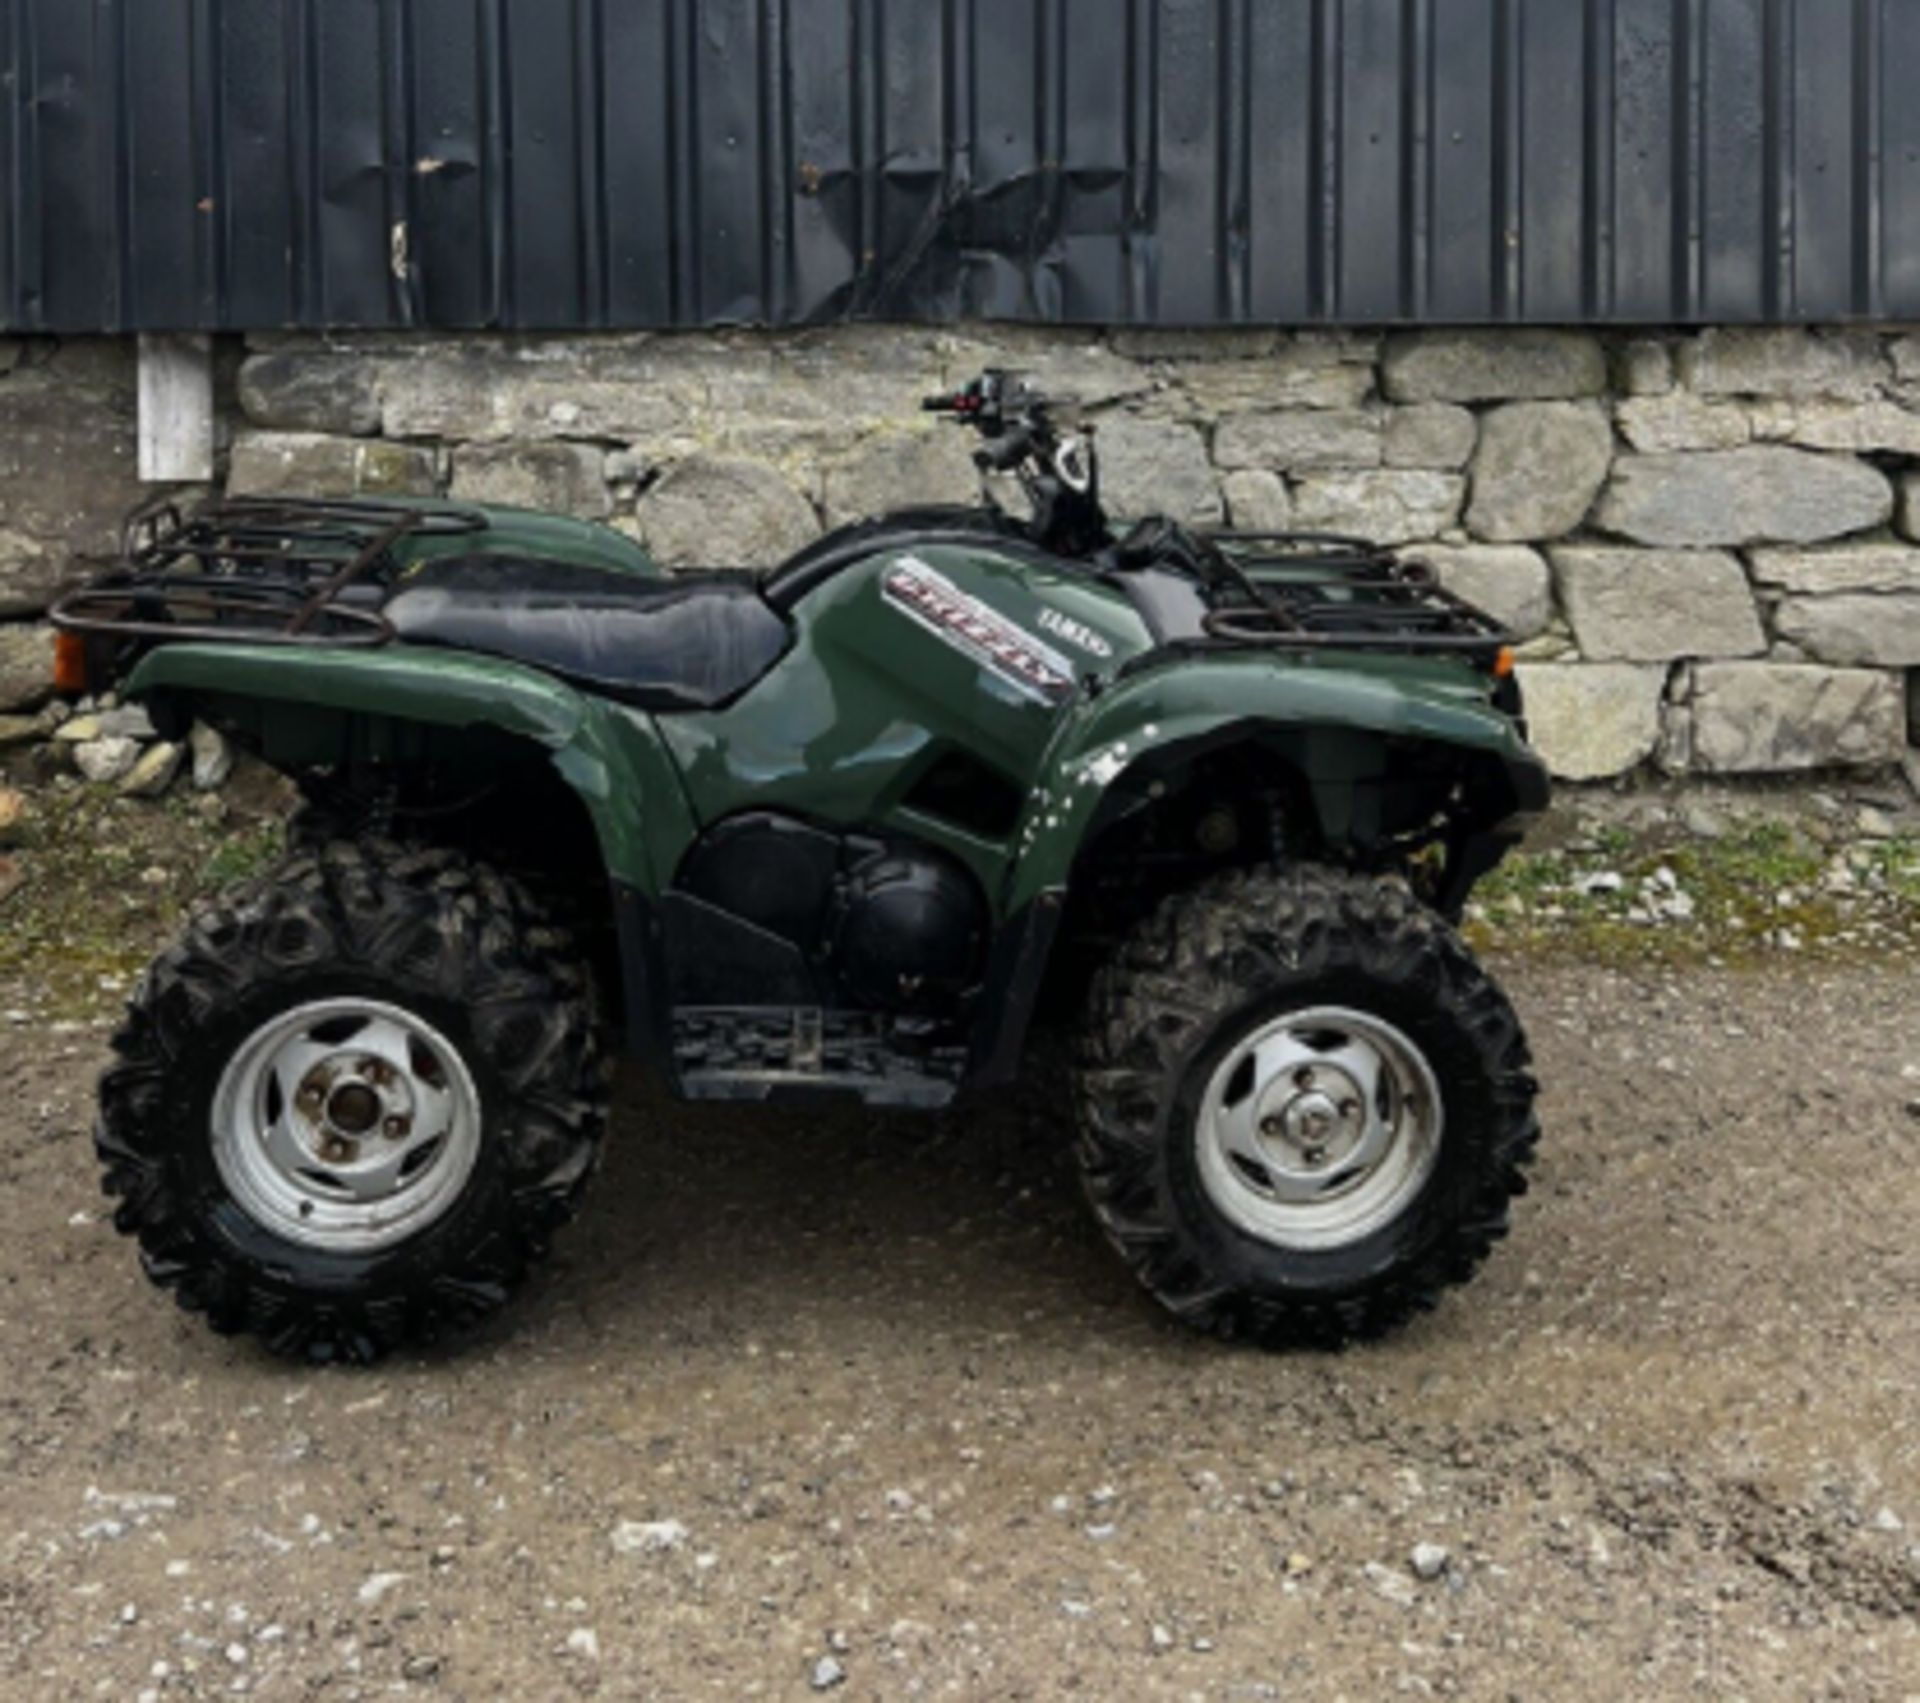 2013 AGRI REGISTERED YAMAHA GRIZZLY 550